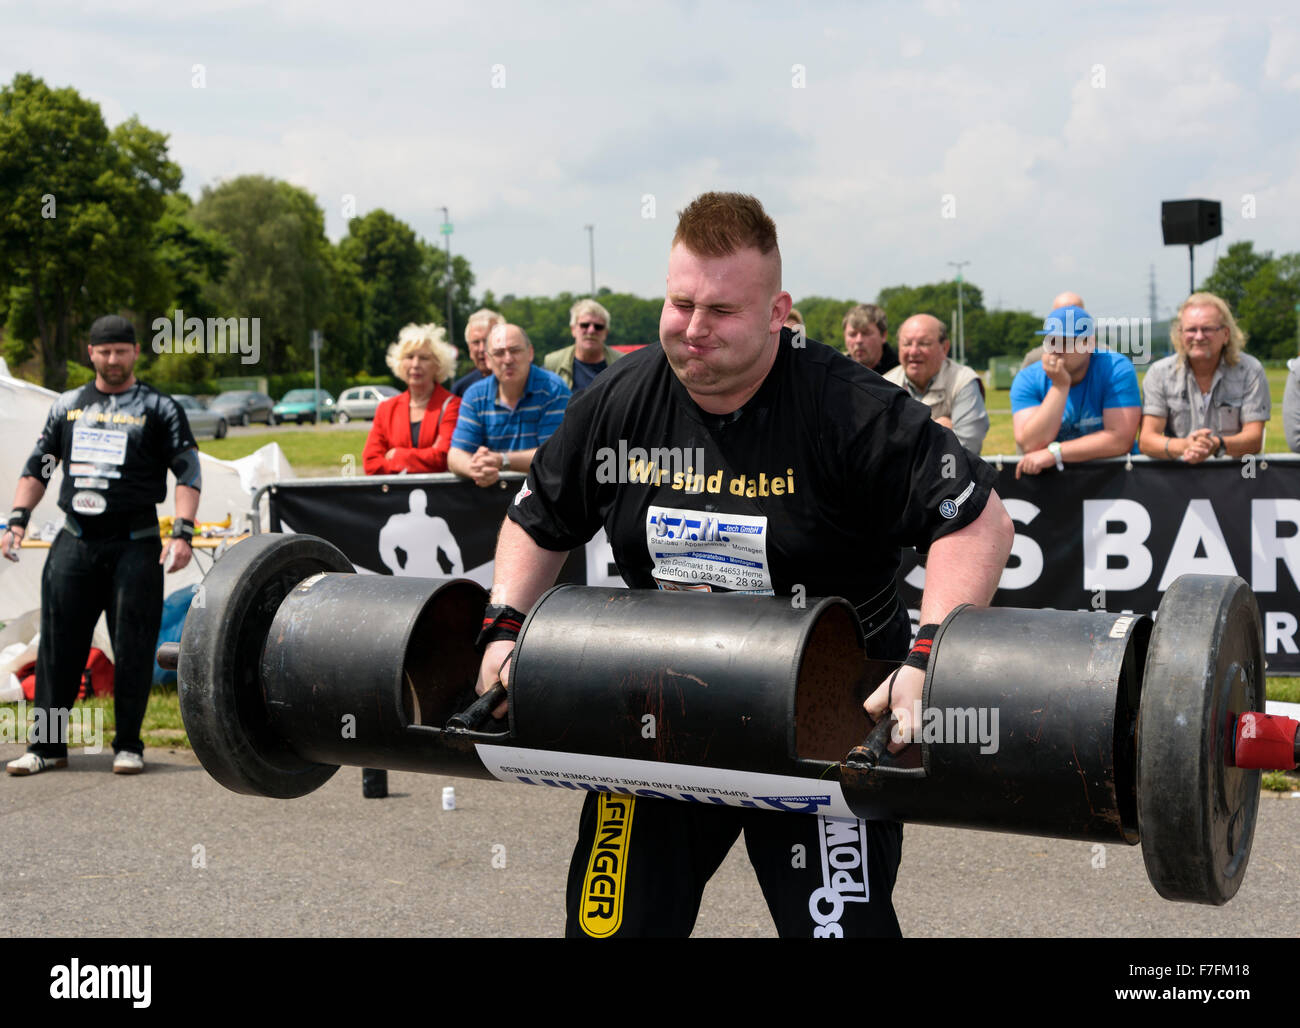 A strong man proves his strength at a public athletics sports event. Stock Photo